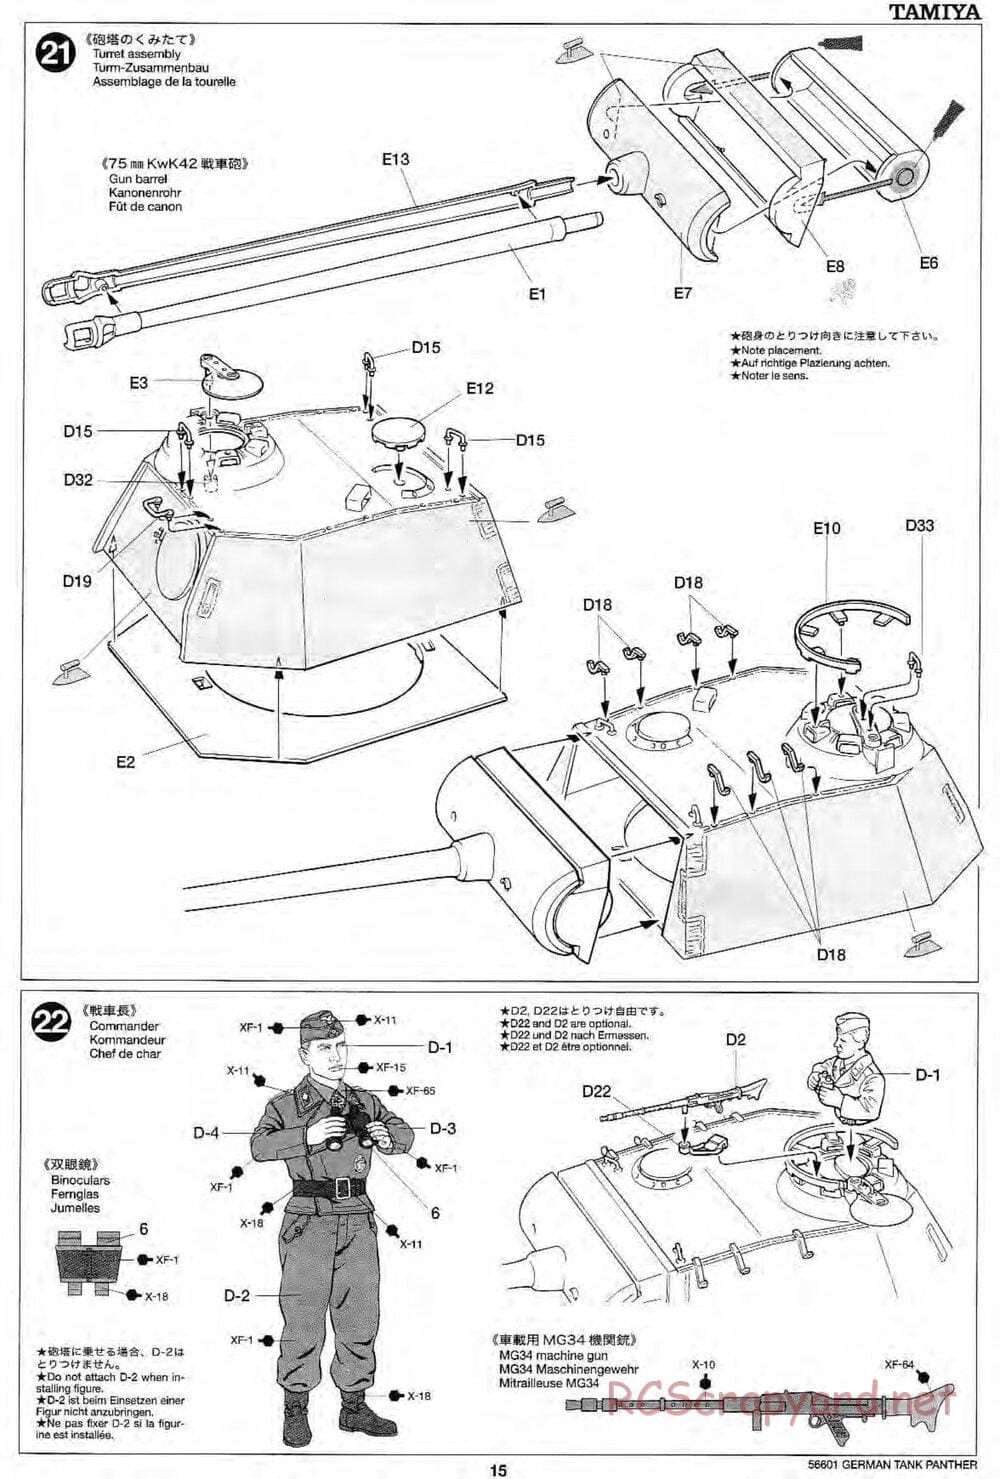 Tamiya - German Tank Panther A - 1/25 Scale Chassis - Manual - Page 15